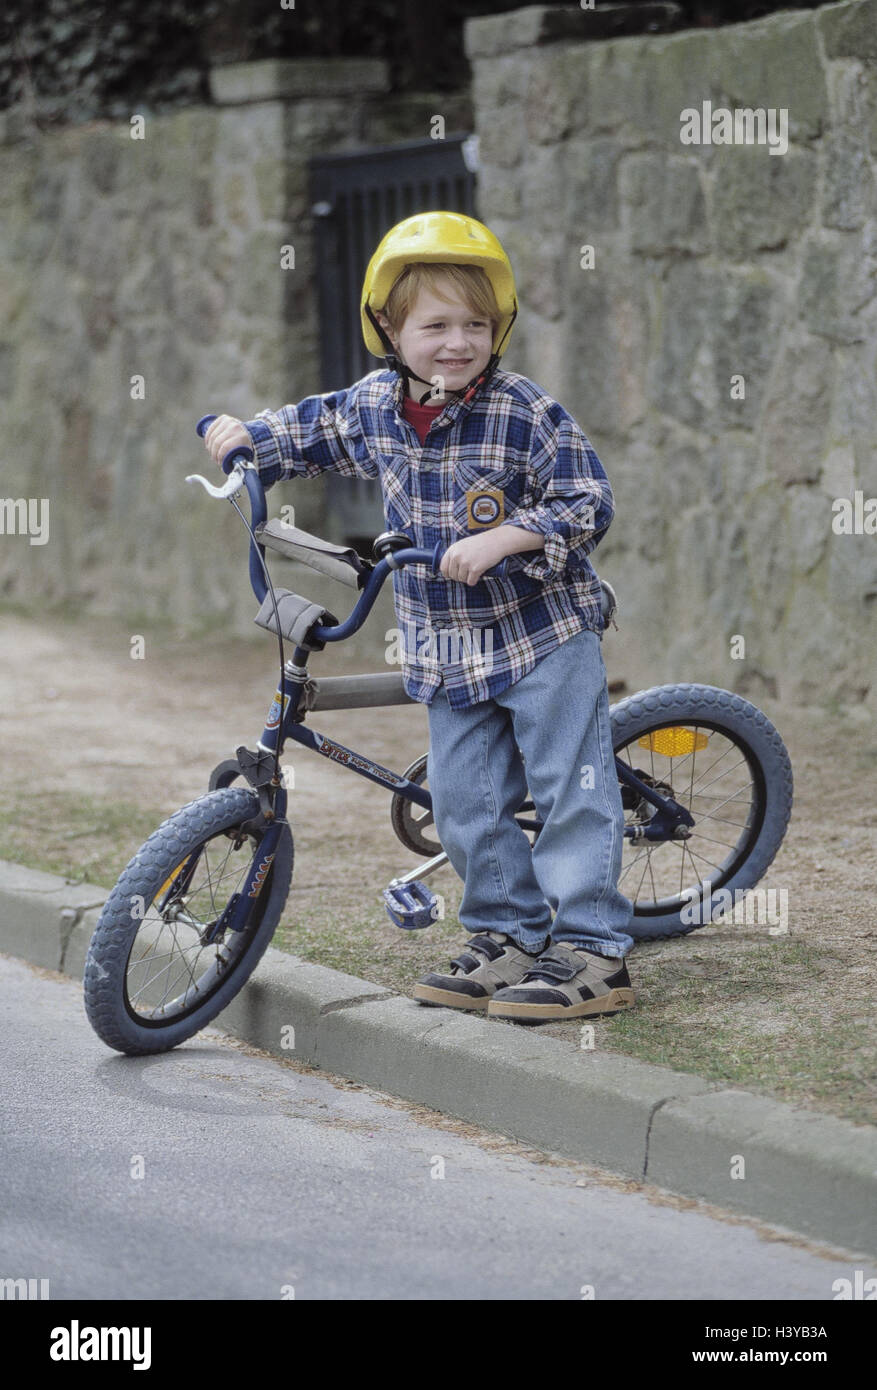 Roadside, boy, helmet, bicycle, pavement, cross, outside, street, sidewalk, side the street, change, child, 6 years, road users, radian, leisure time, childhood, danger, dangerously, danger situation, carefully, attention, safety helmet, hard hat, bicycle Stock Photo